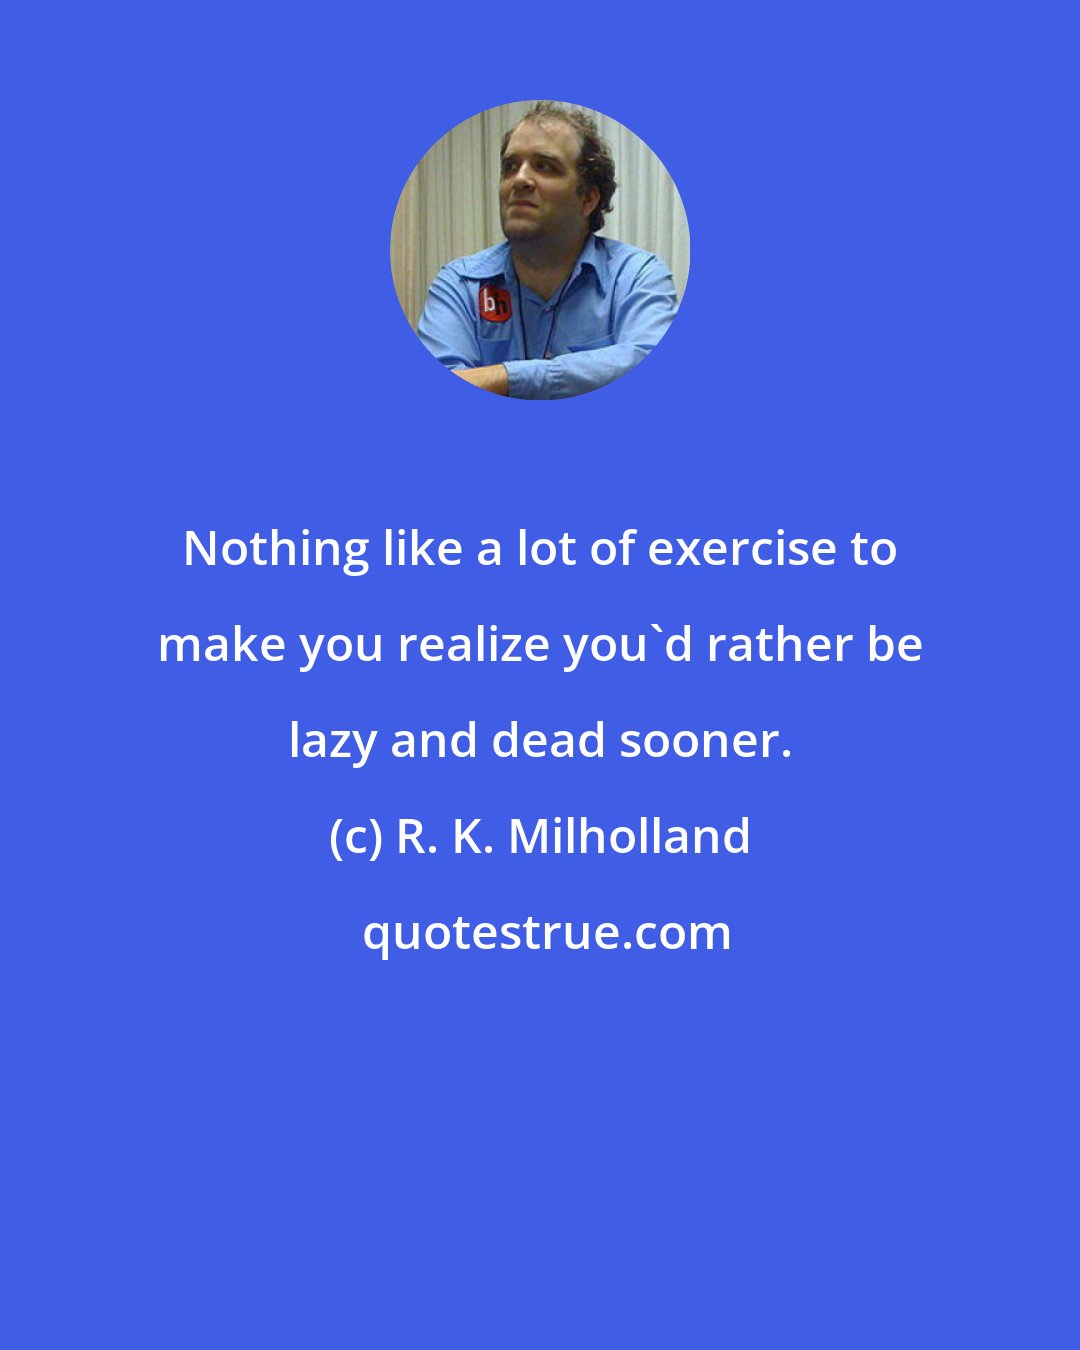 R. K. Milholland: Nothing like a lot of exercise to make you realize you'd rather be lazy and dead sooner.